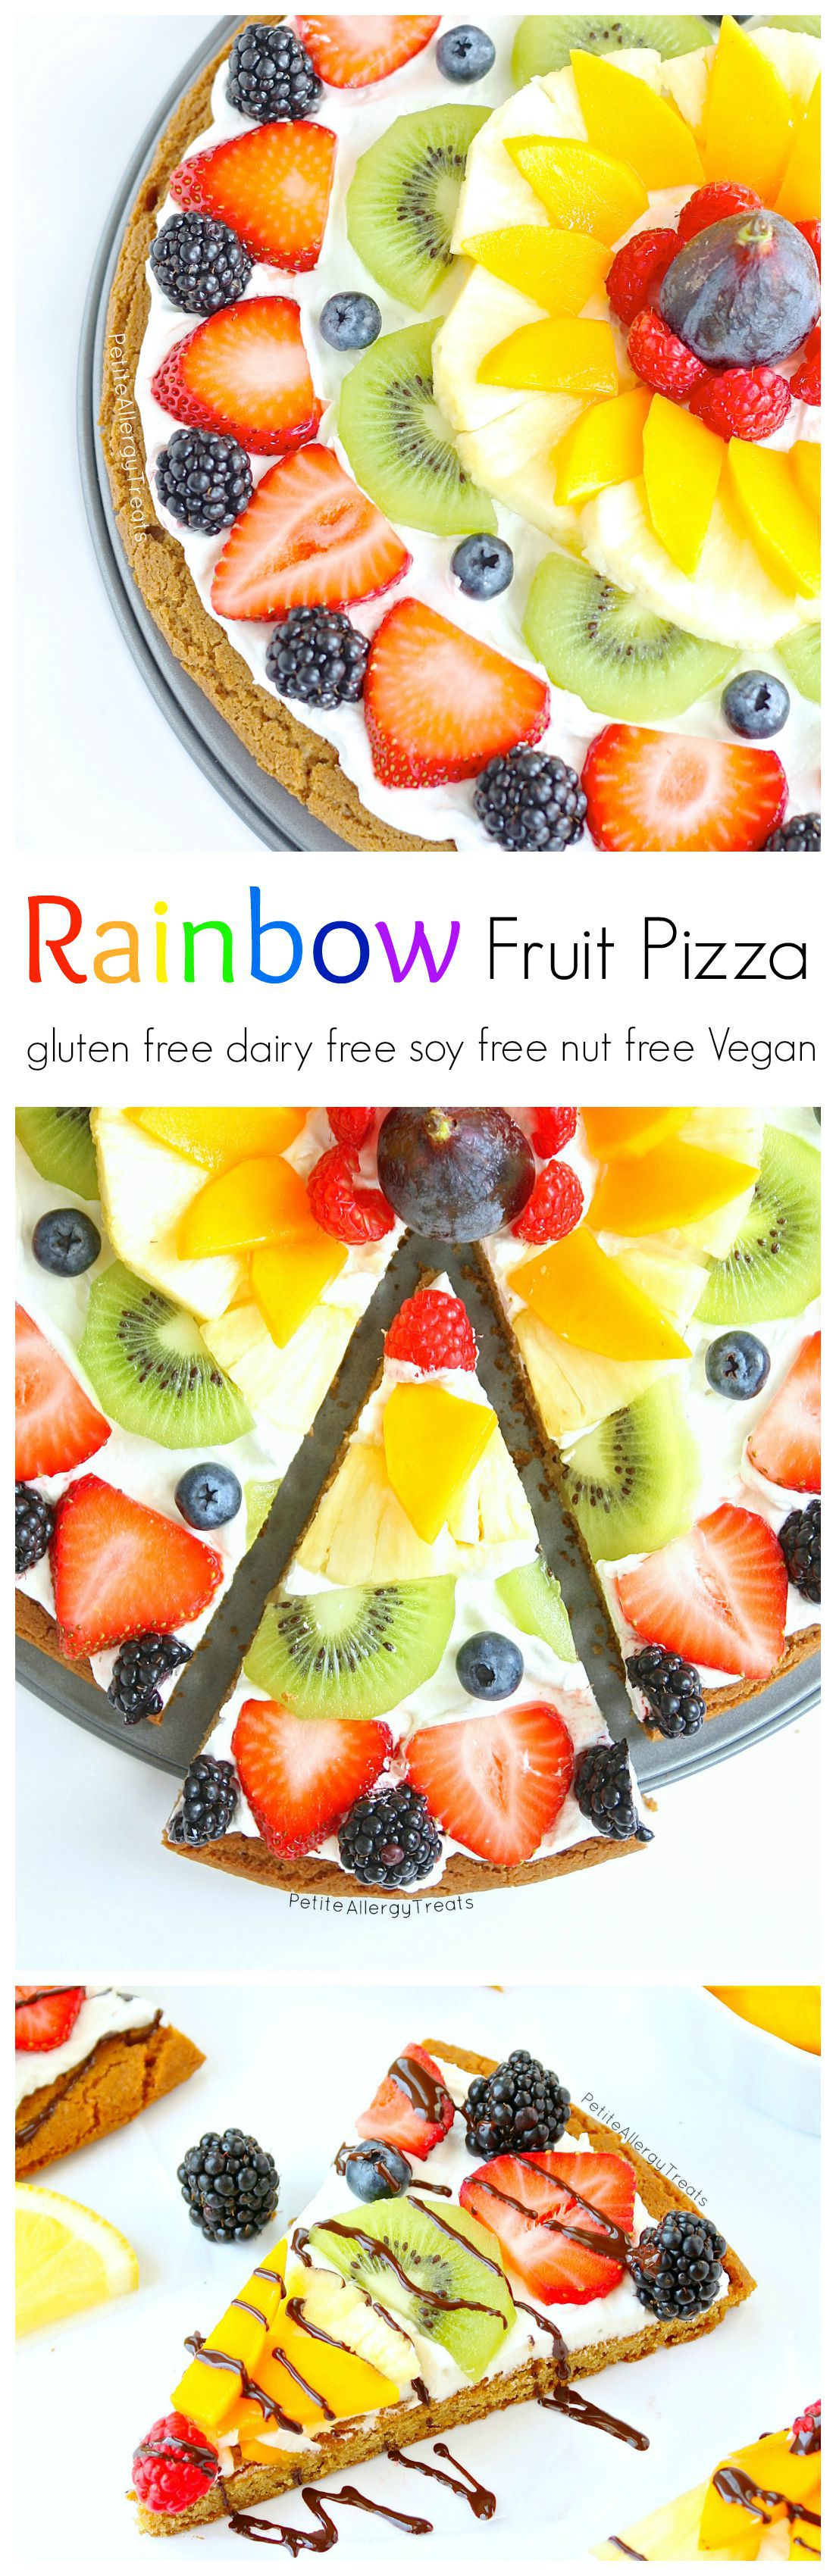 Fruit Pizza (dairy free gluten free Vegan)- Impress anyone with a dairy free gluten free rainbow fruit pizza made with whole grains. #tothefullest